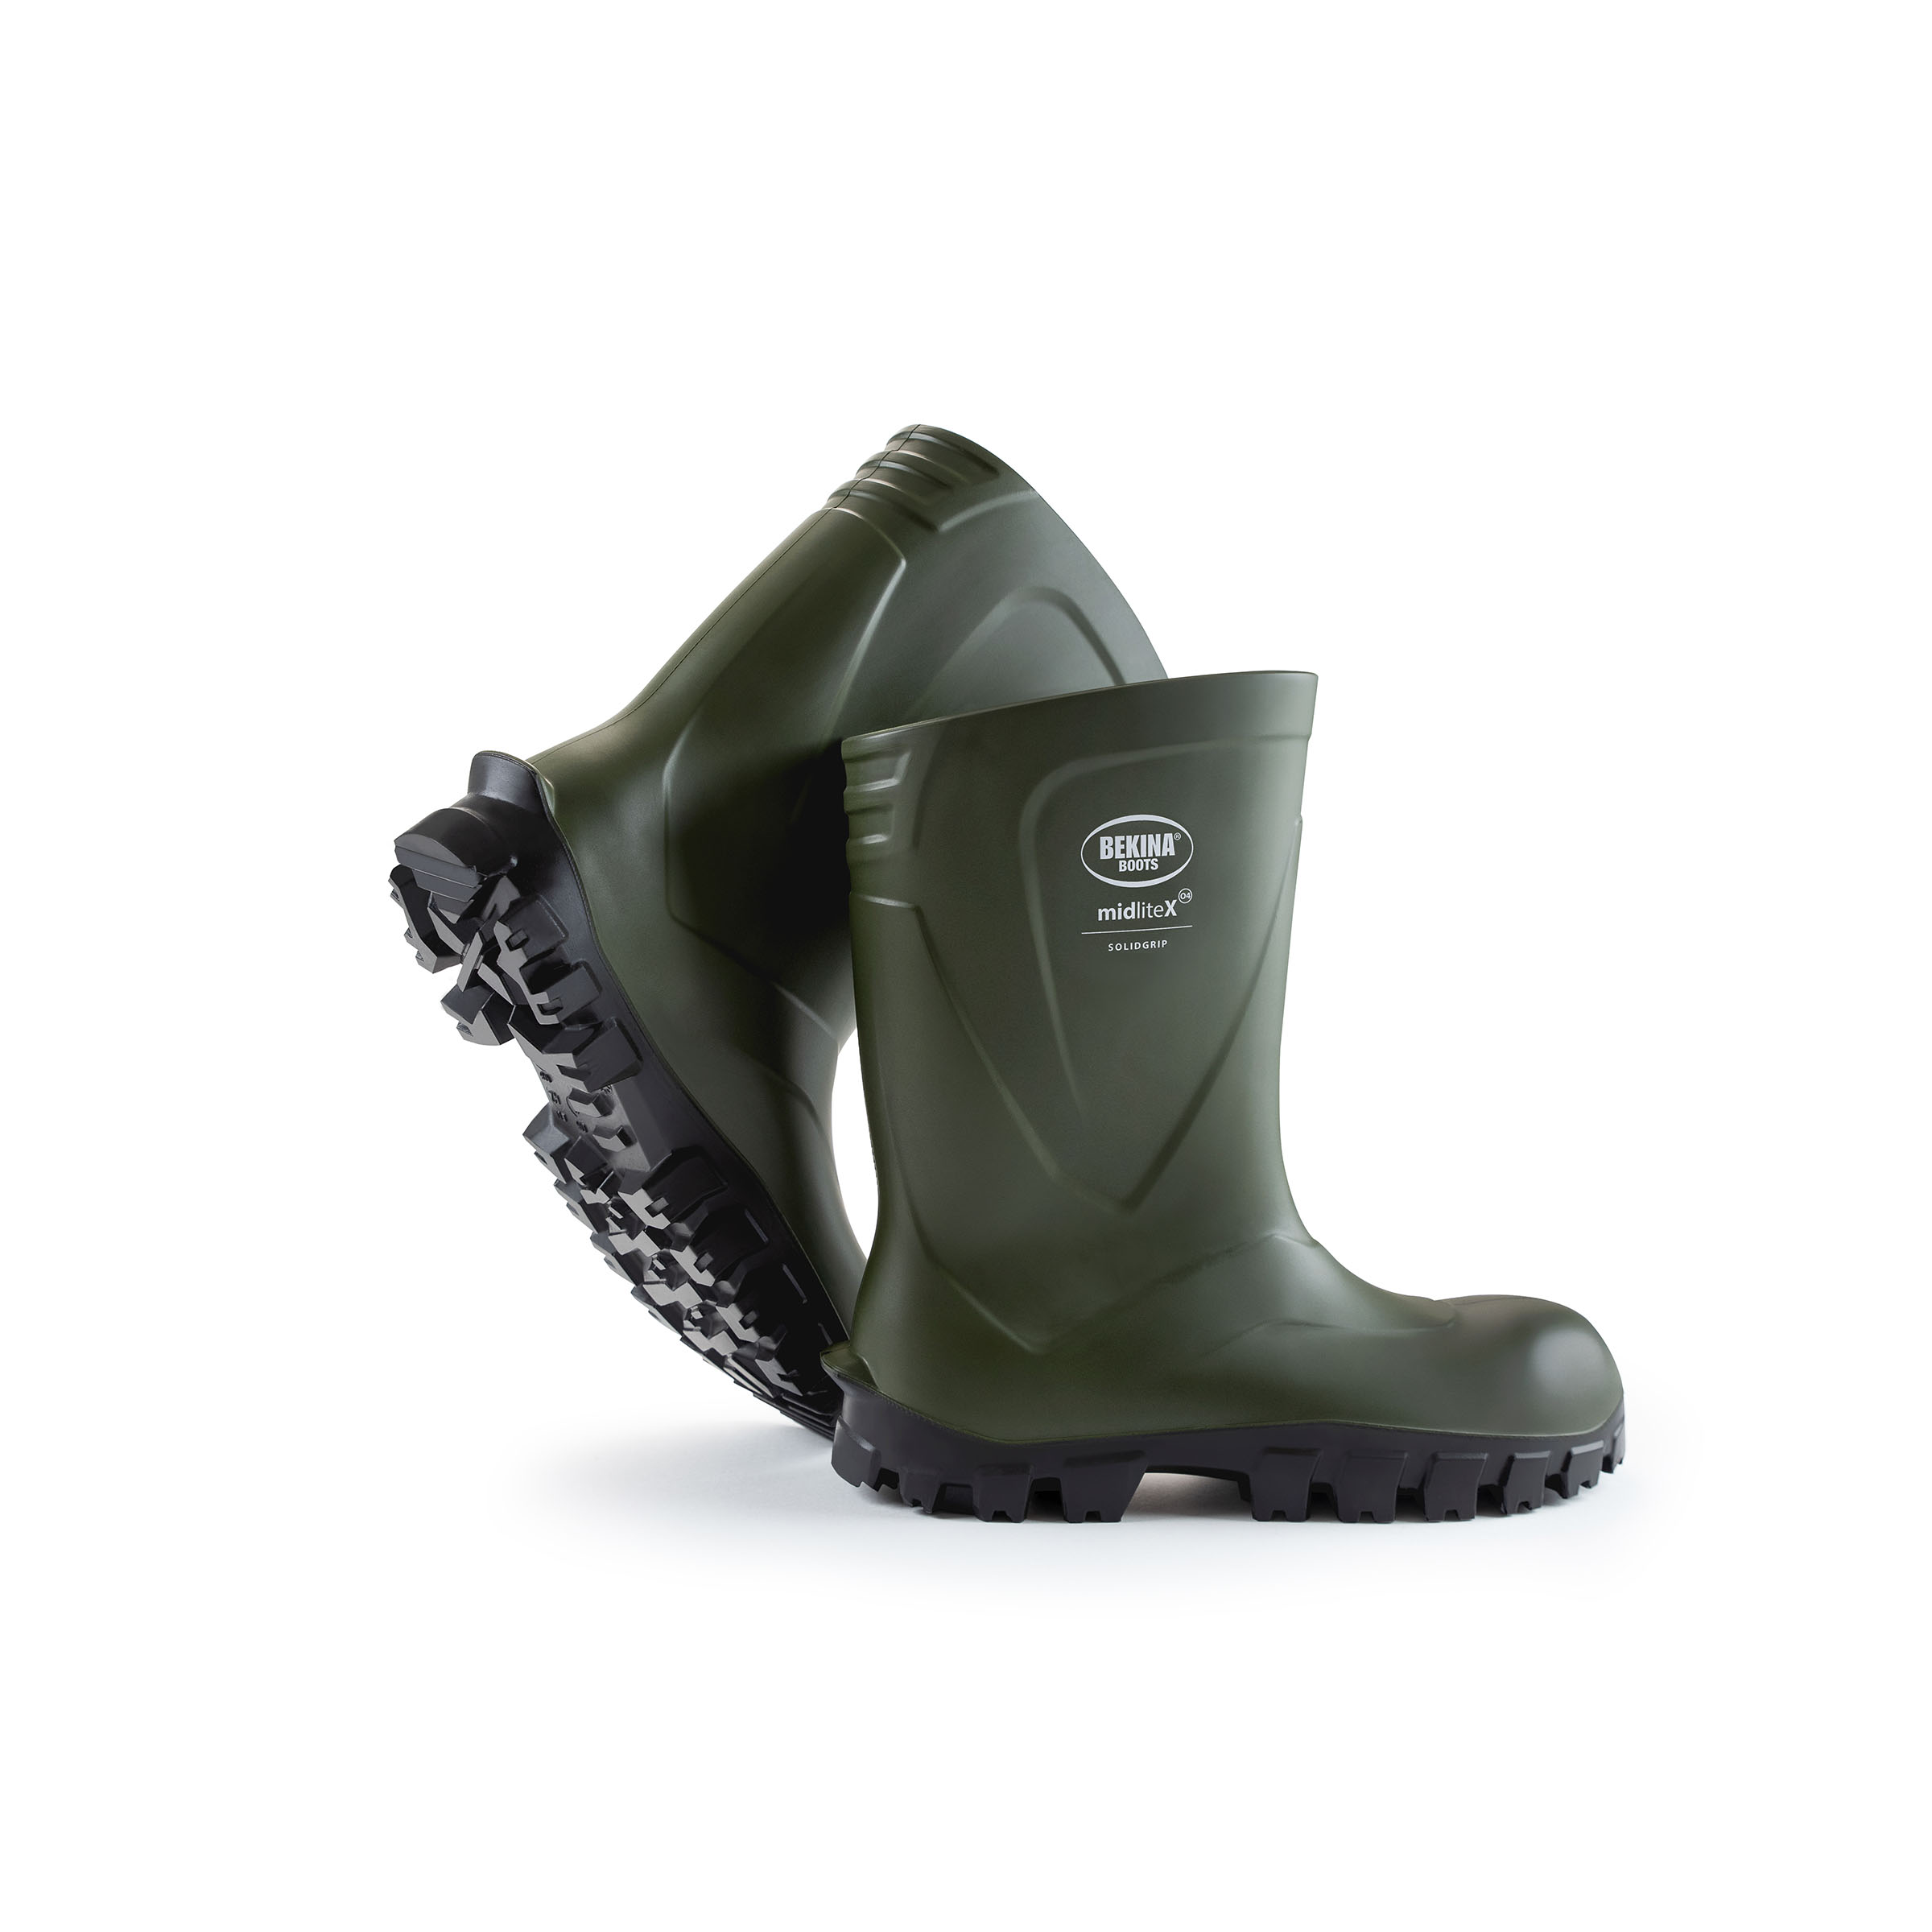 MidliteX SolidGrip, without safety toe cap (O4), green